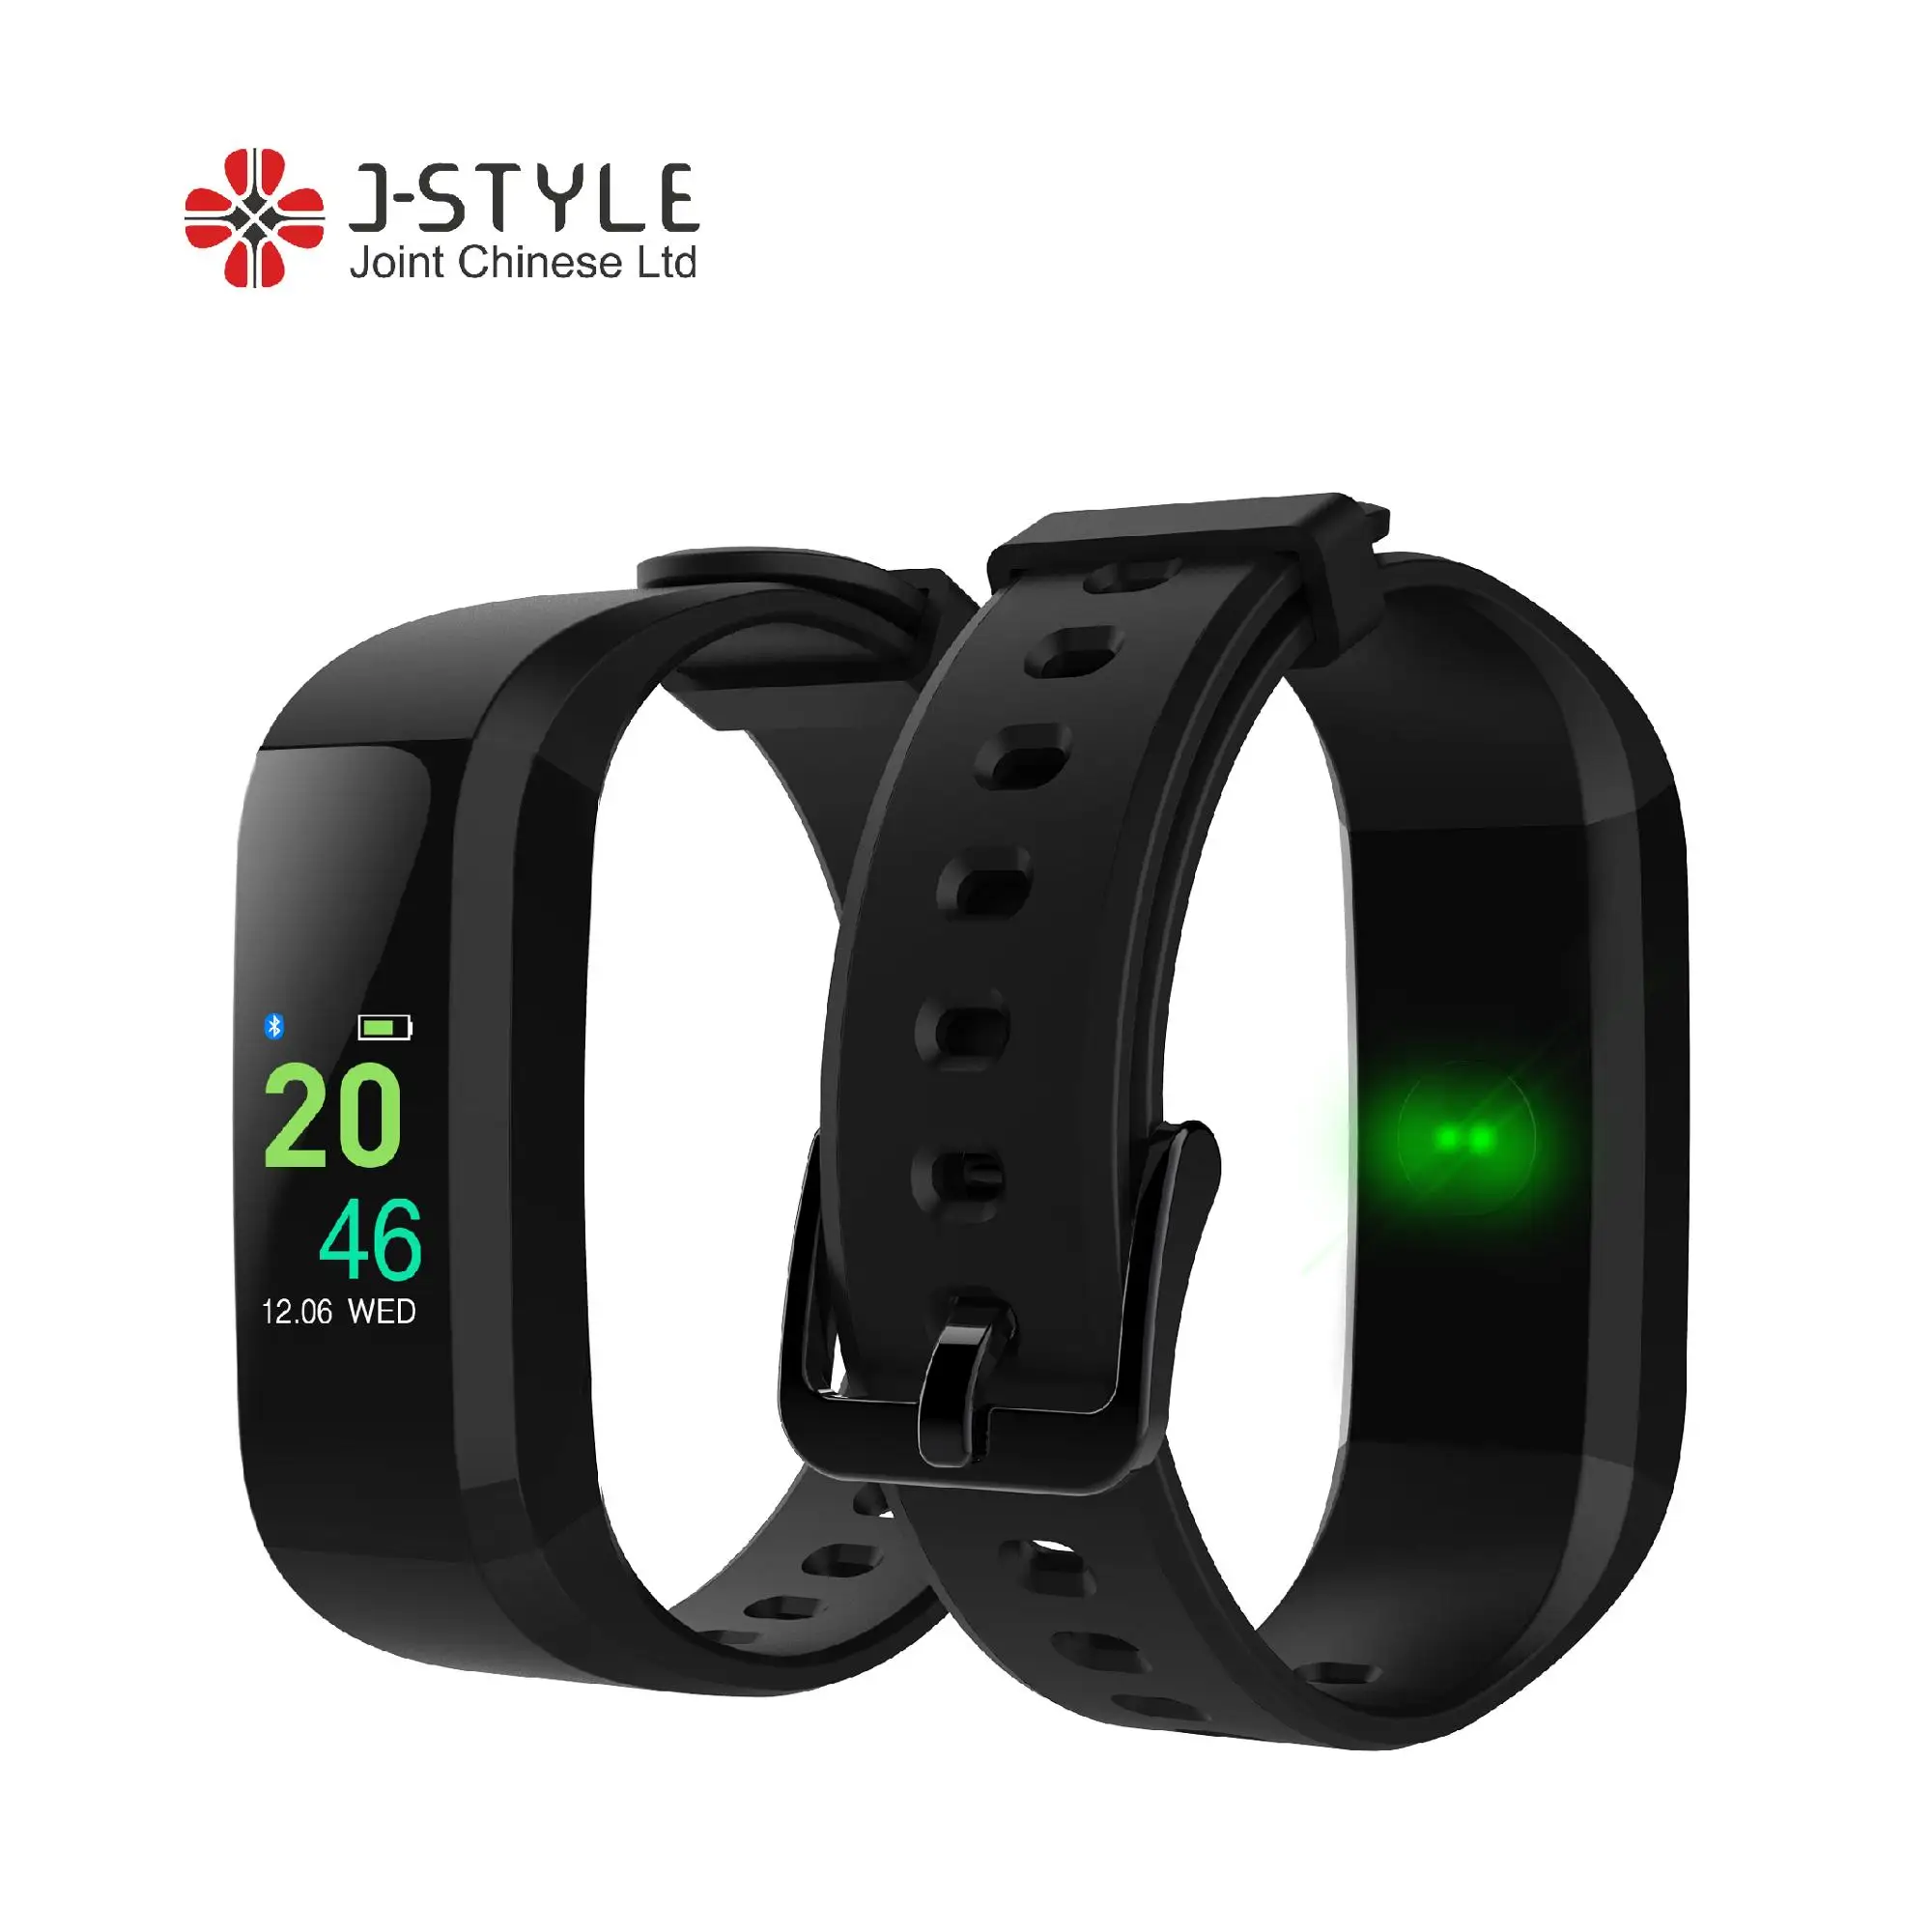 

J-Style 1810 CE RoHS approved 0.96 inch smart bracelet dynamic heart rate monitor with sedentary reminder, Black, red, slate, or oem color